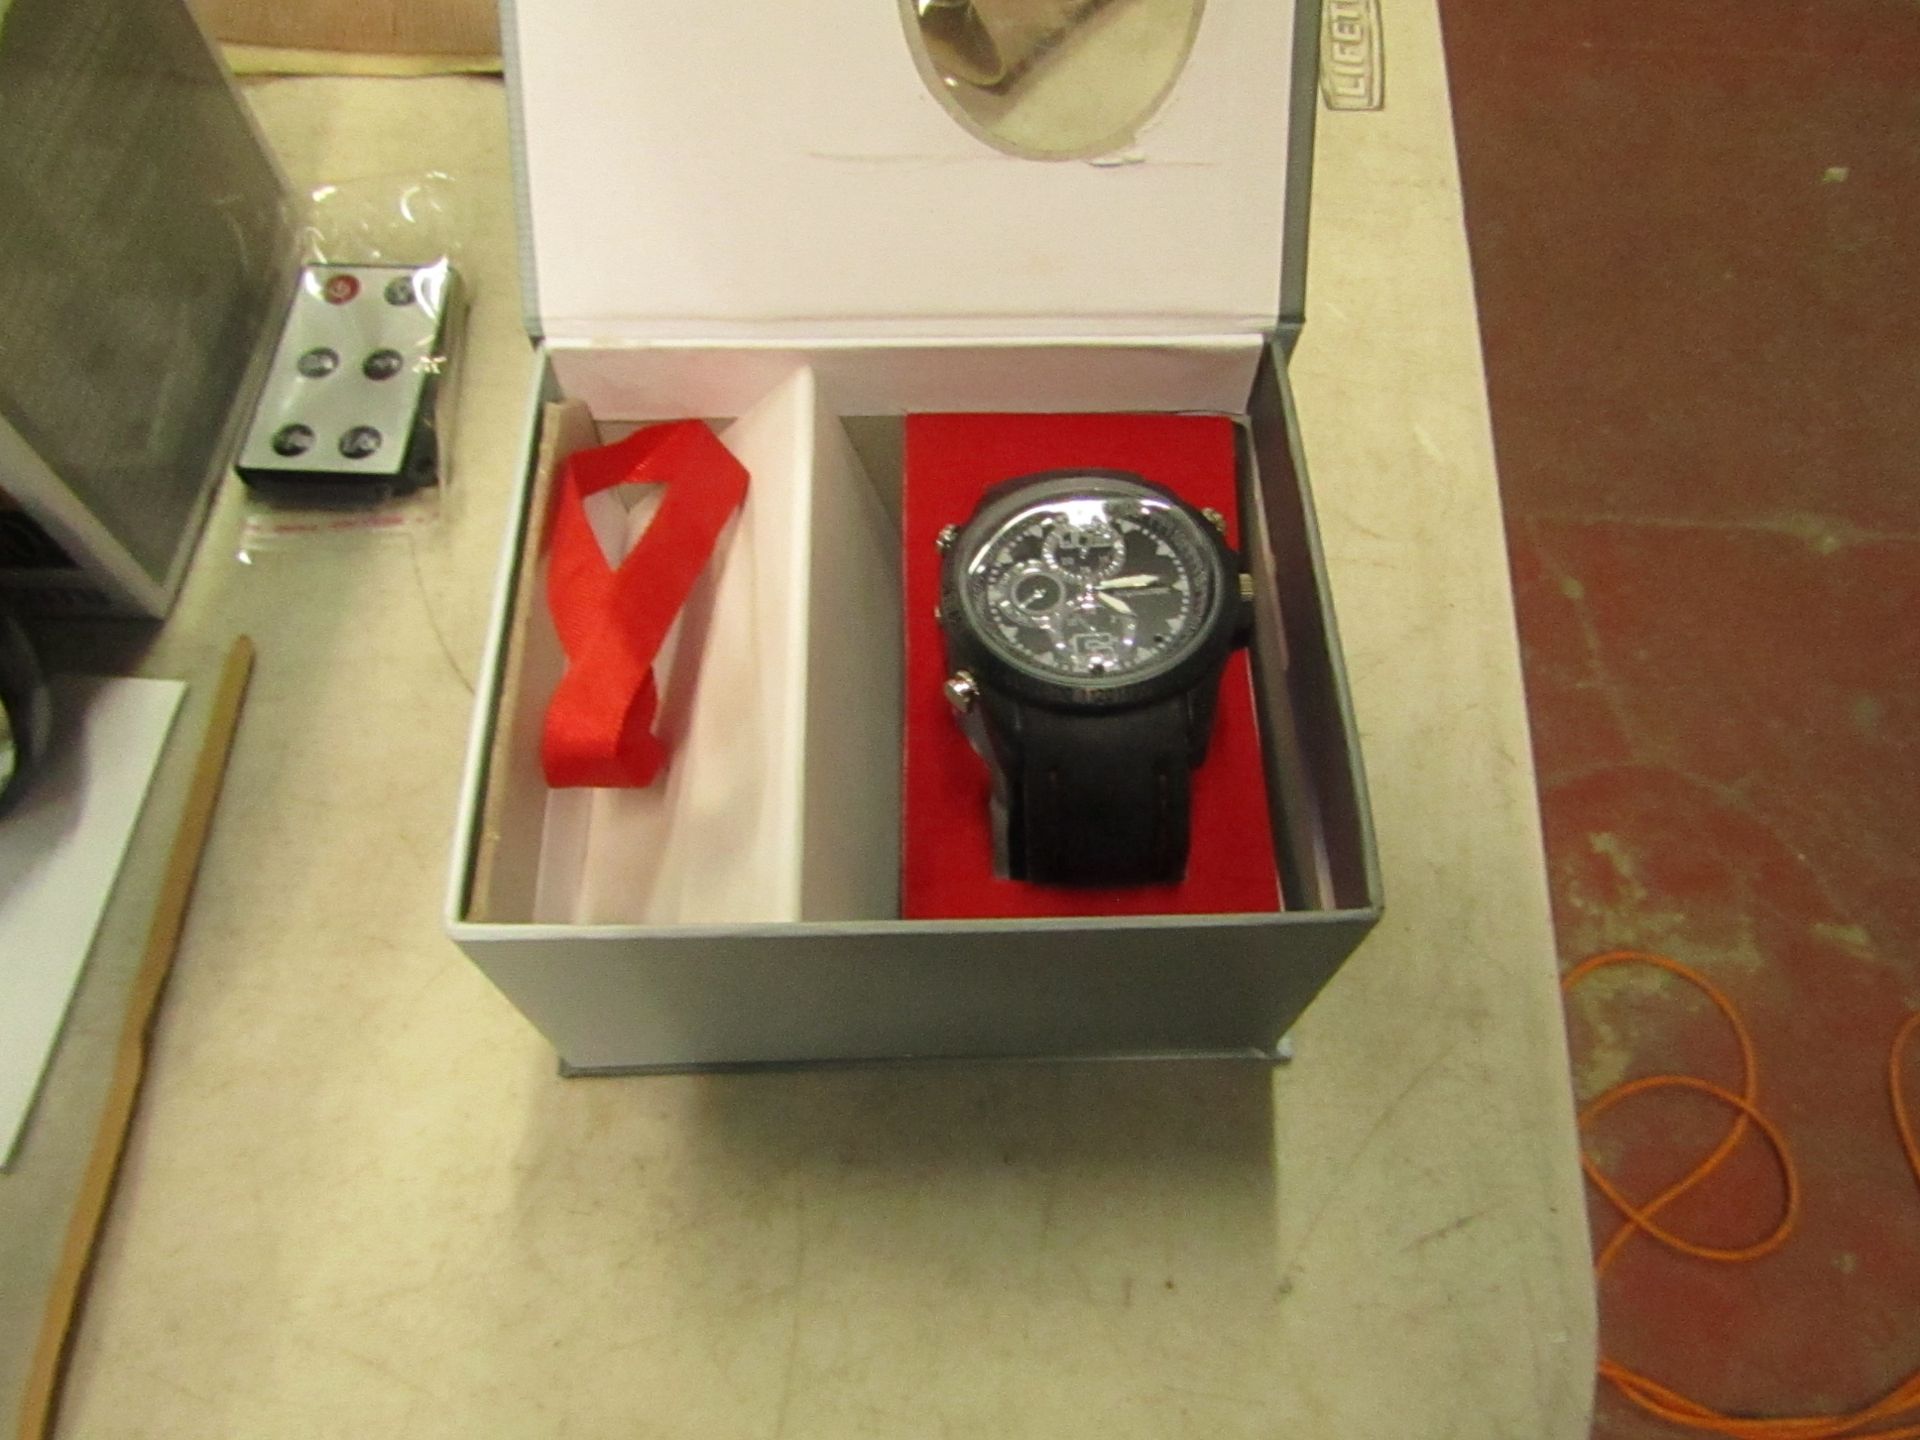 WATCH - Includes mp3 player, multiple audio and built in battery, untested and boxed.